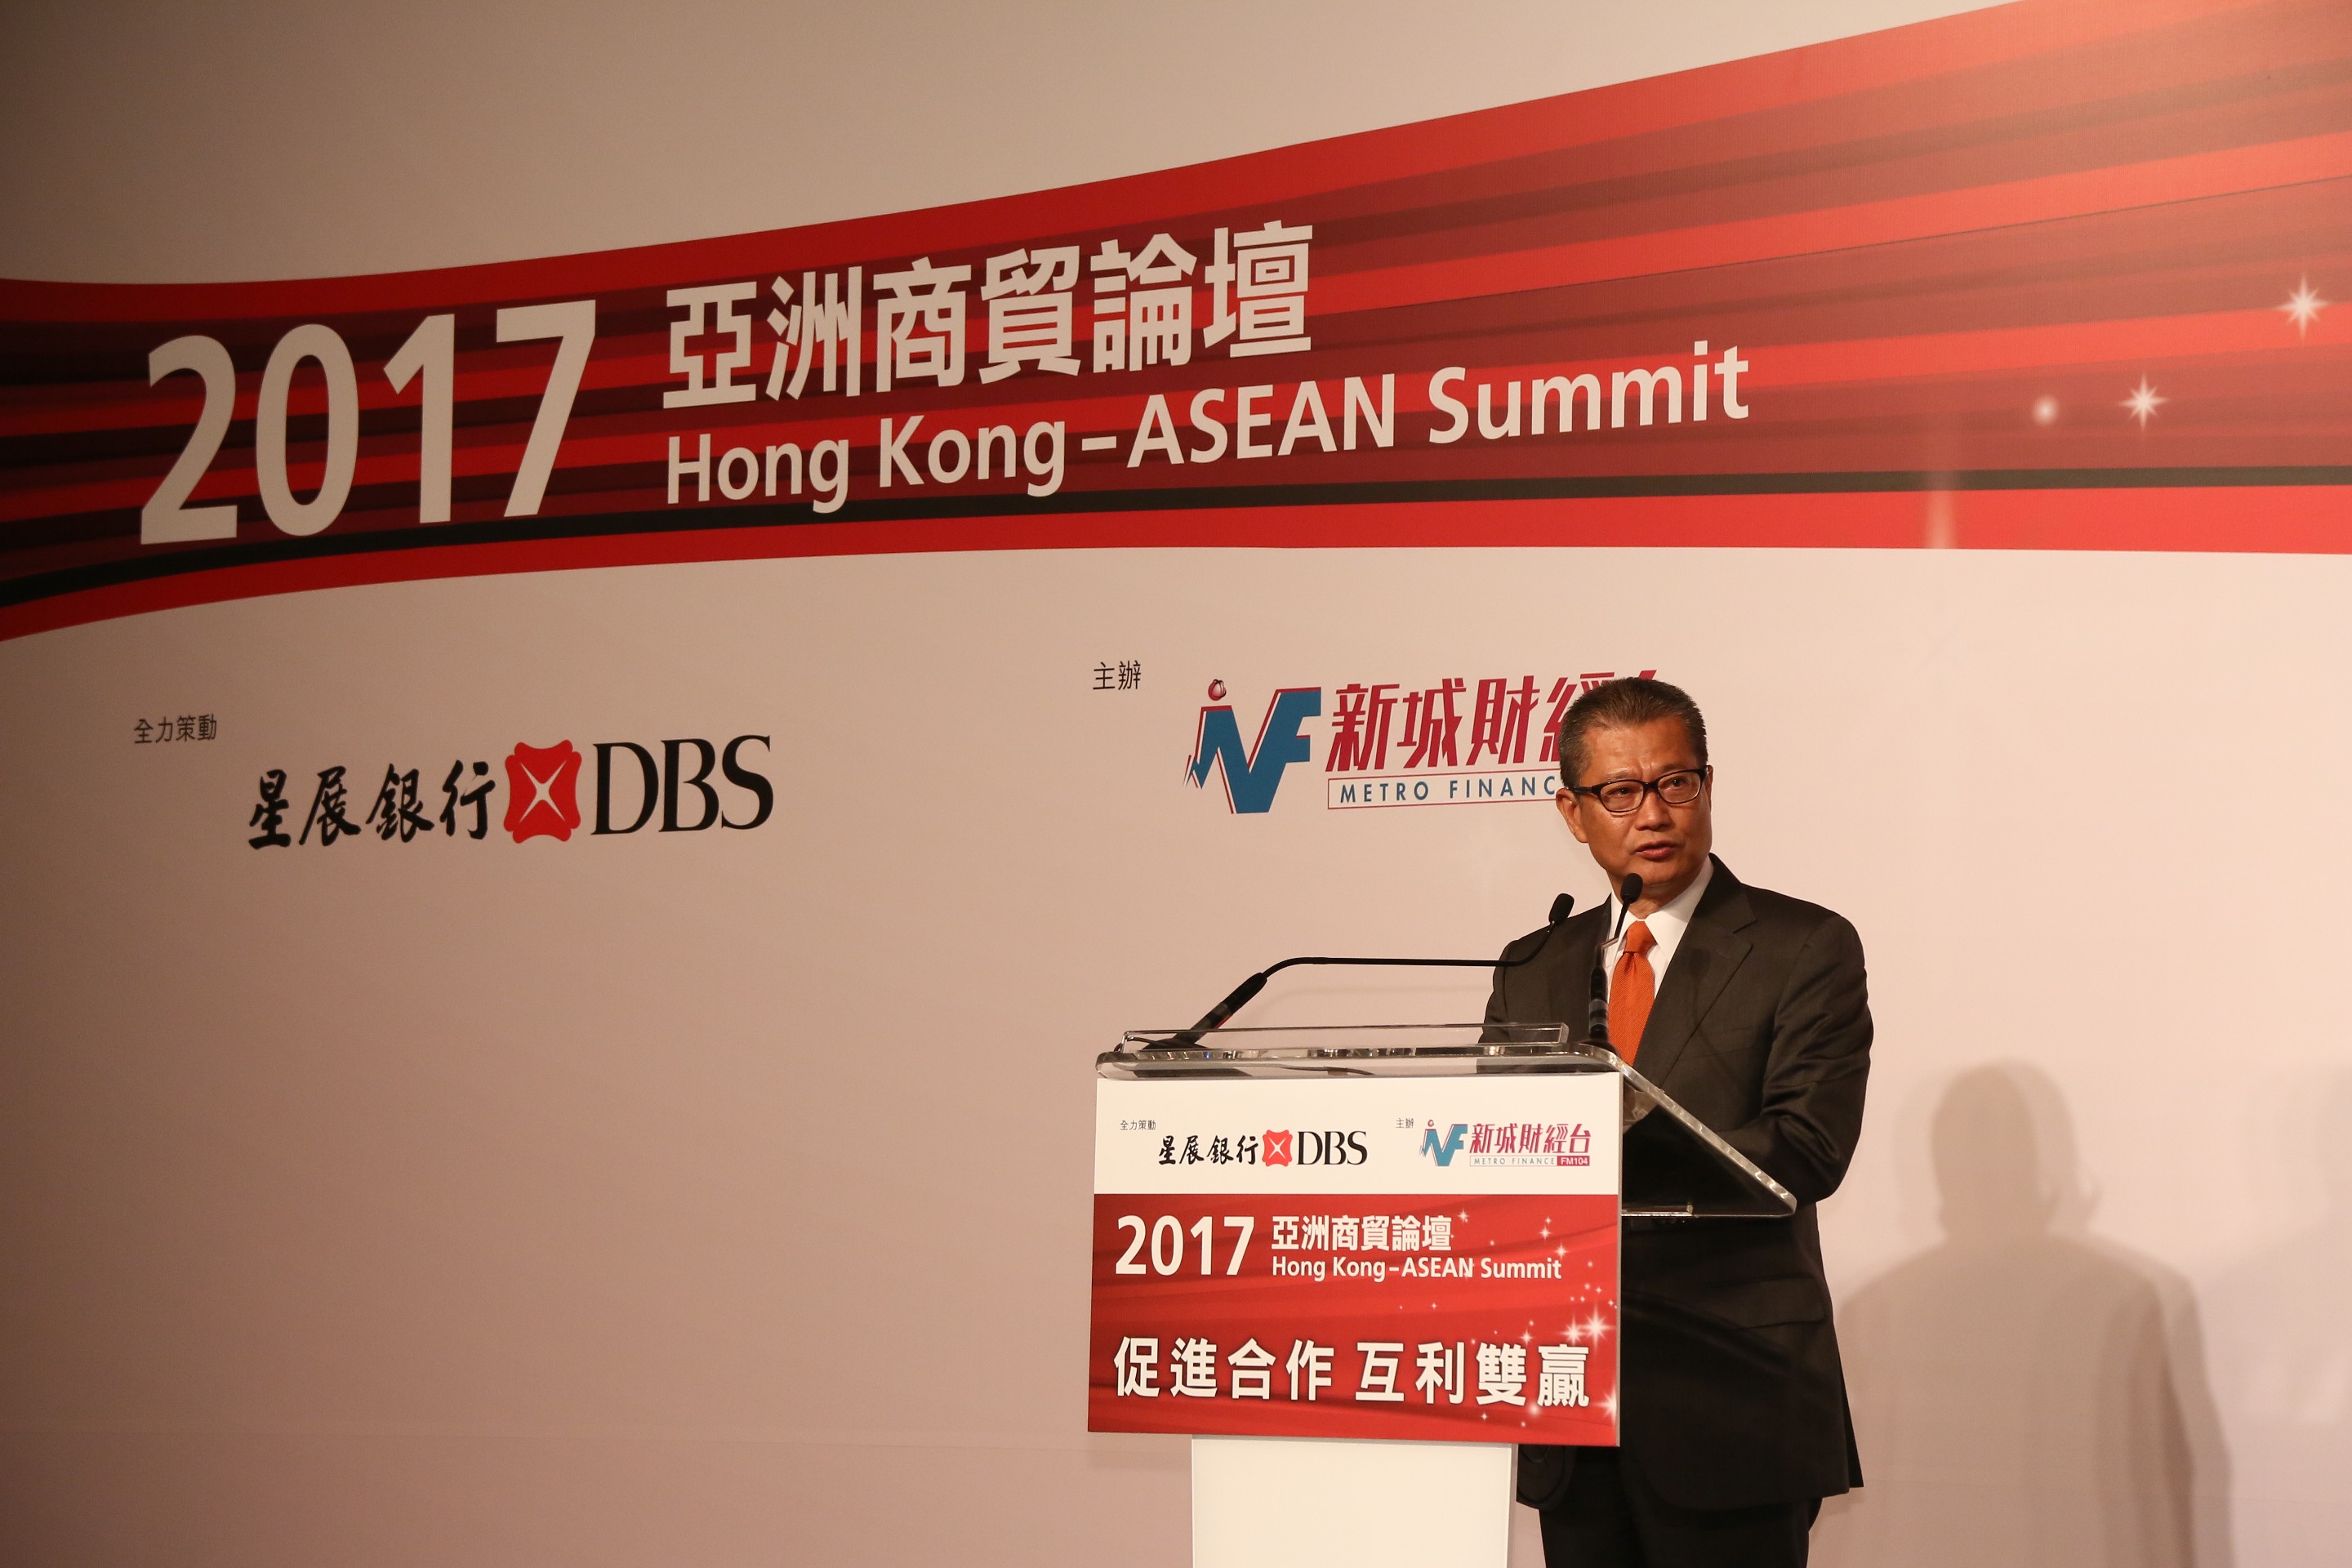 Photo 2: The Financial Secretary, The Honourable Mr Paul Chan, GBM, GBS, MH, JP, delivered the luncheon keynote speech, in which he highlighted how the government helps Hong Kong enterprises seize Belt and Road opportunities and Hong Kong’s role in promoting such business activities in the region.